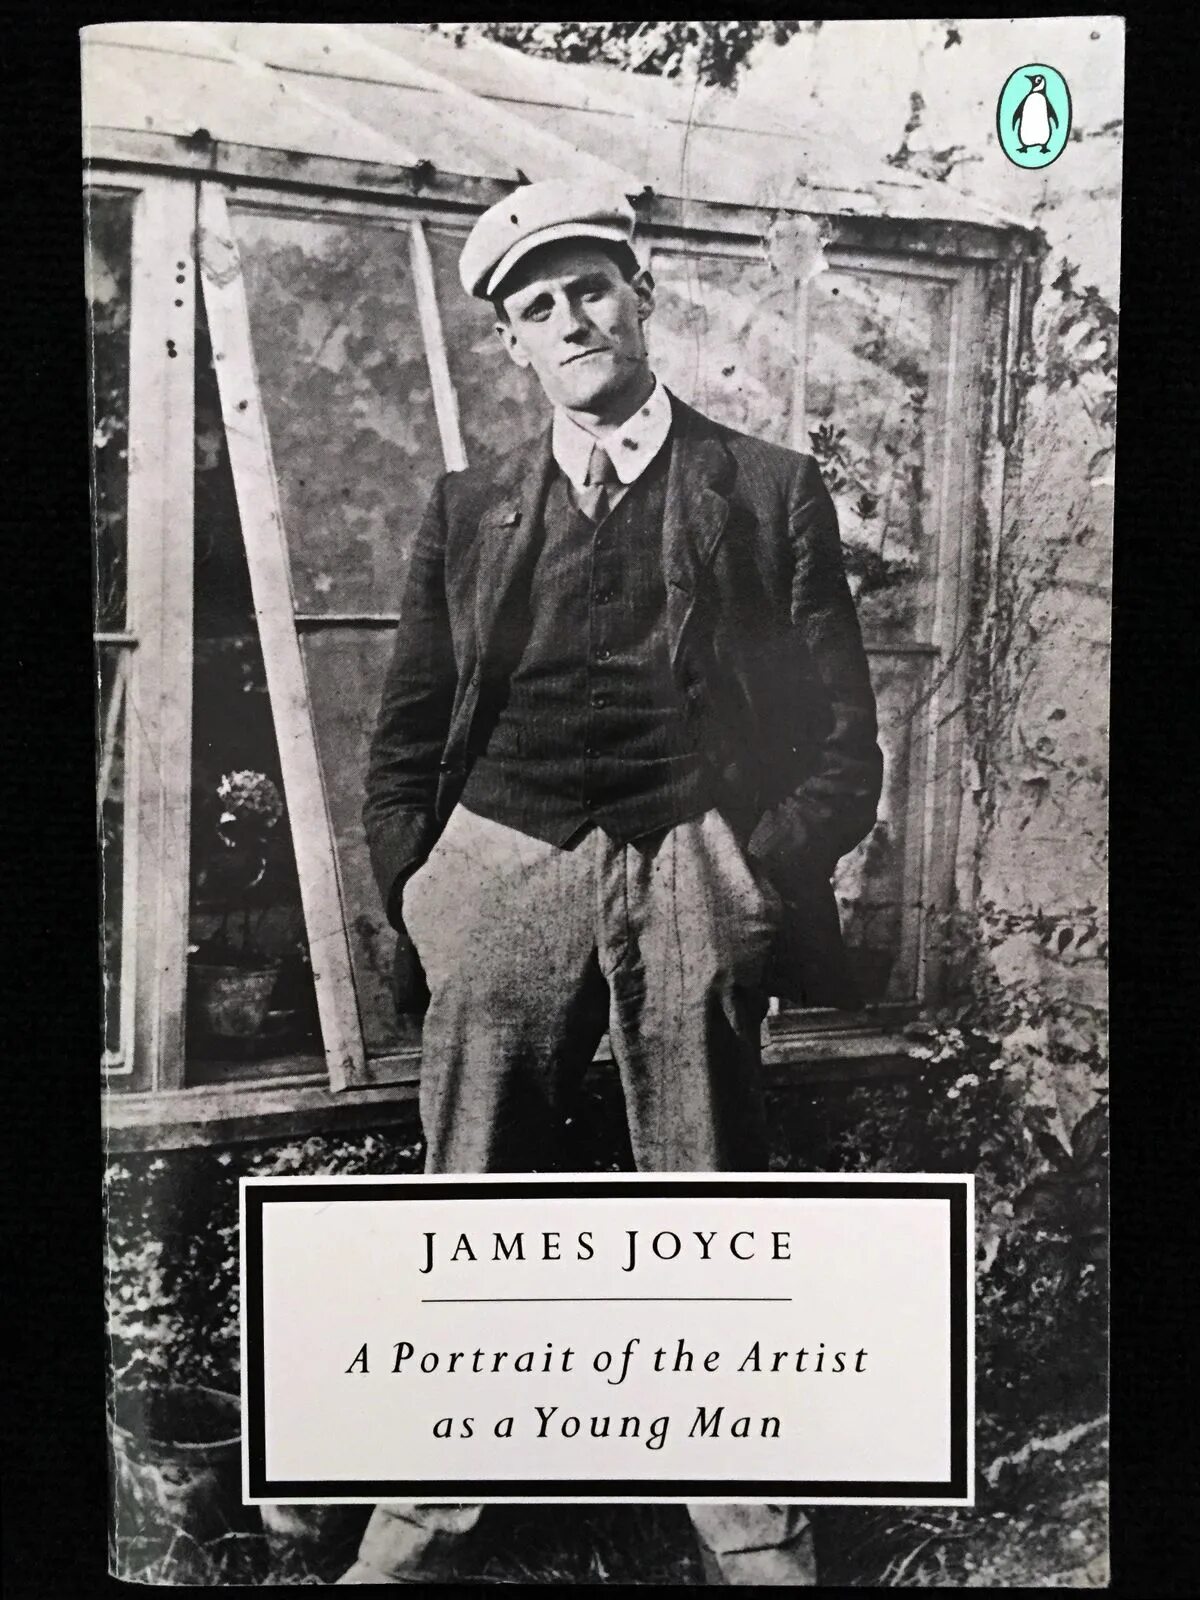 James Joyce young. A portrait of the artist as a young man book. James Joyce a portrait of a young man. James Joyce a portrait of a young man old book. This man is young